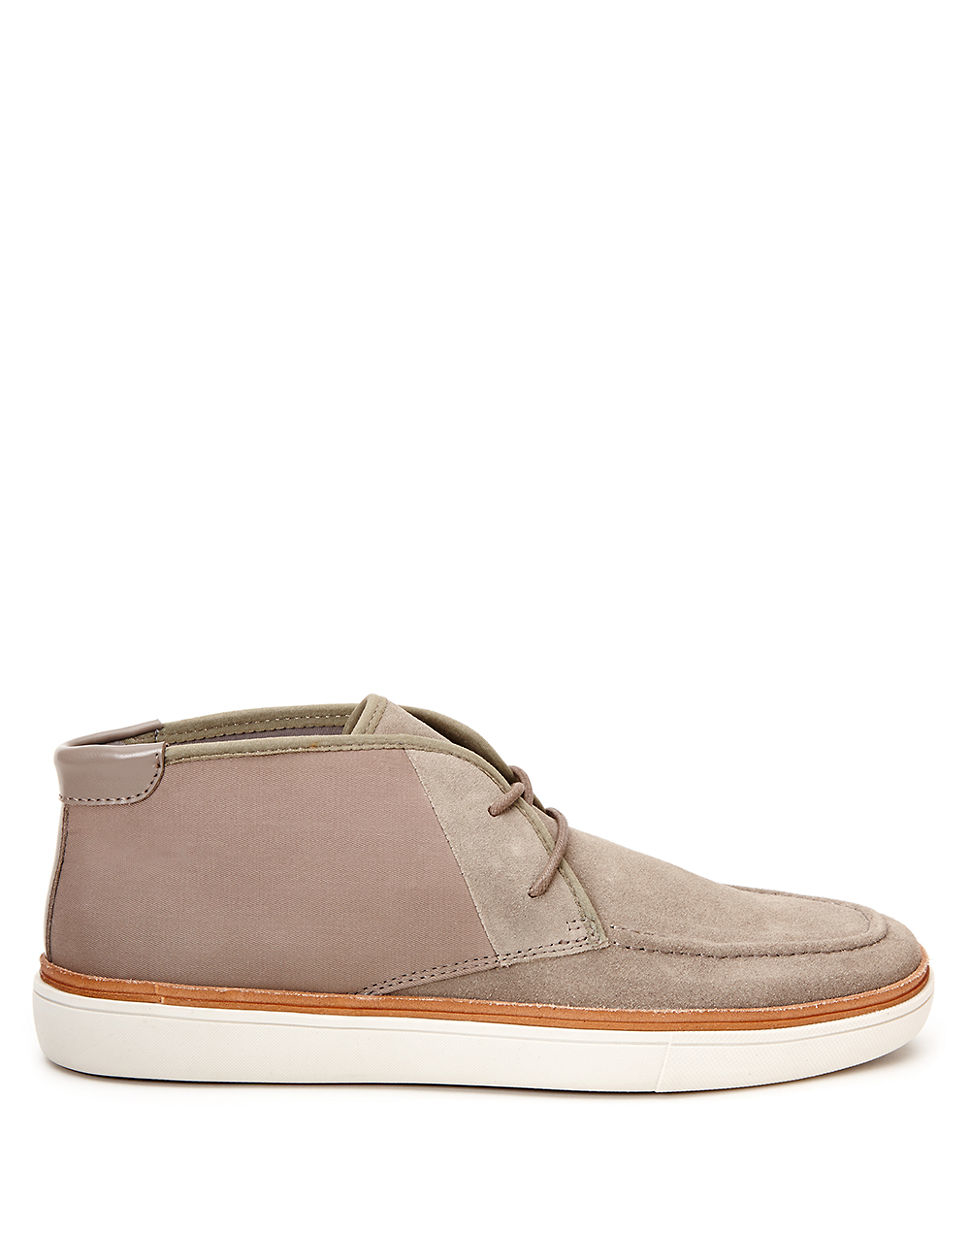 Calvin Klein Jake Canvas Moc-Toe Chukka Boots in Natural for Men - Lyst